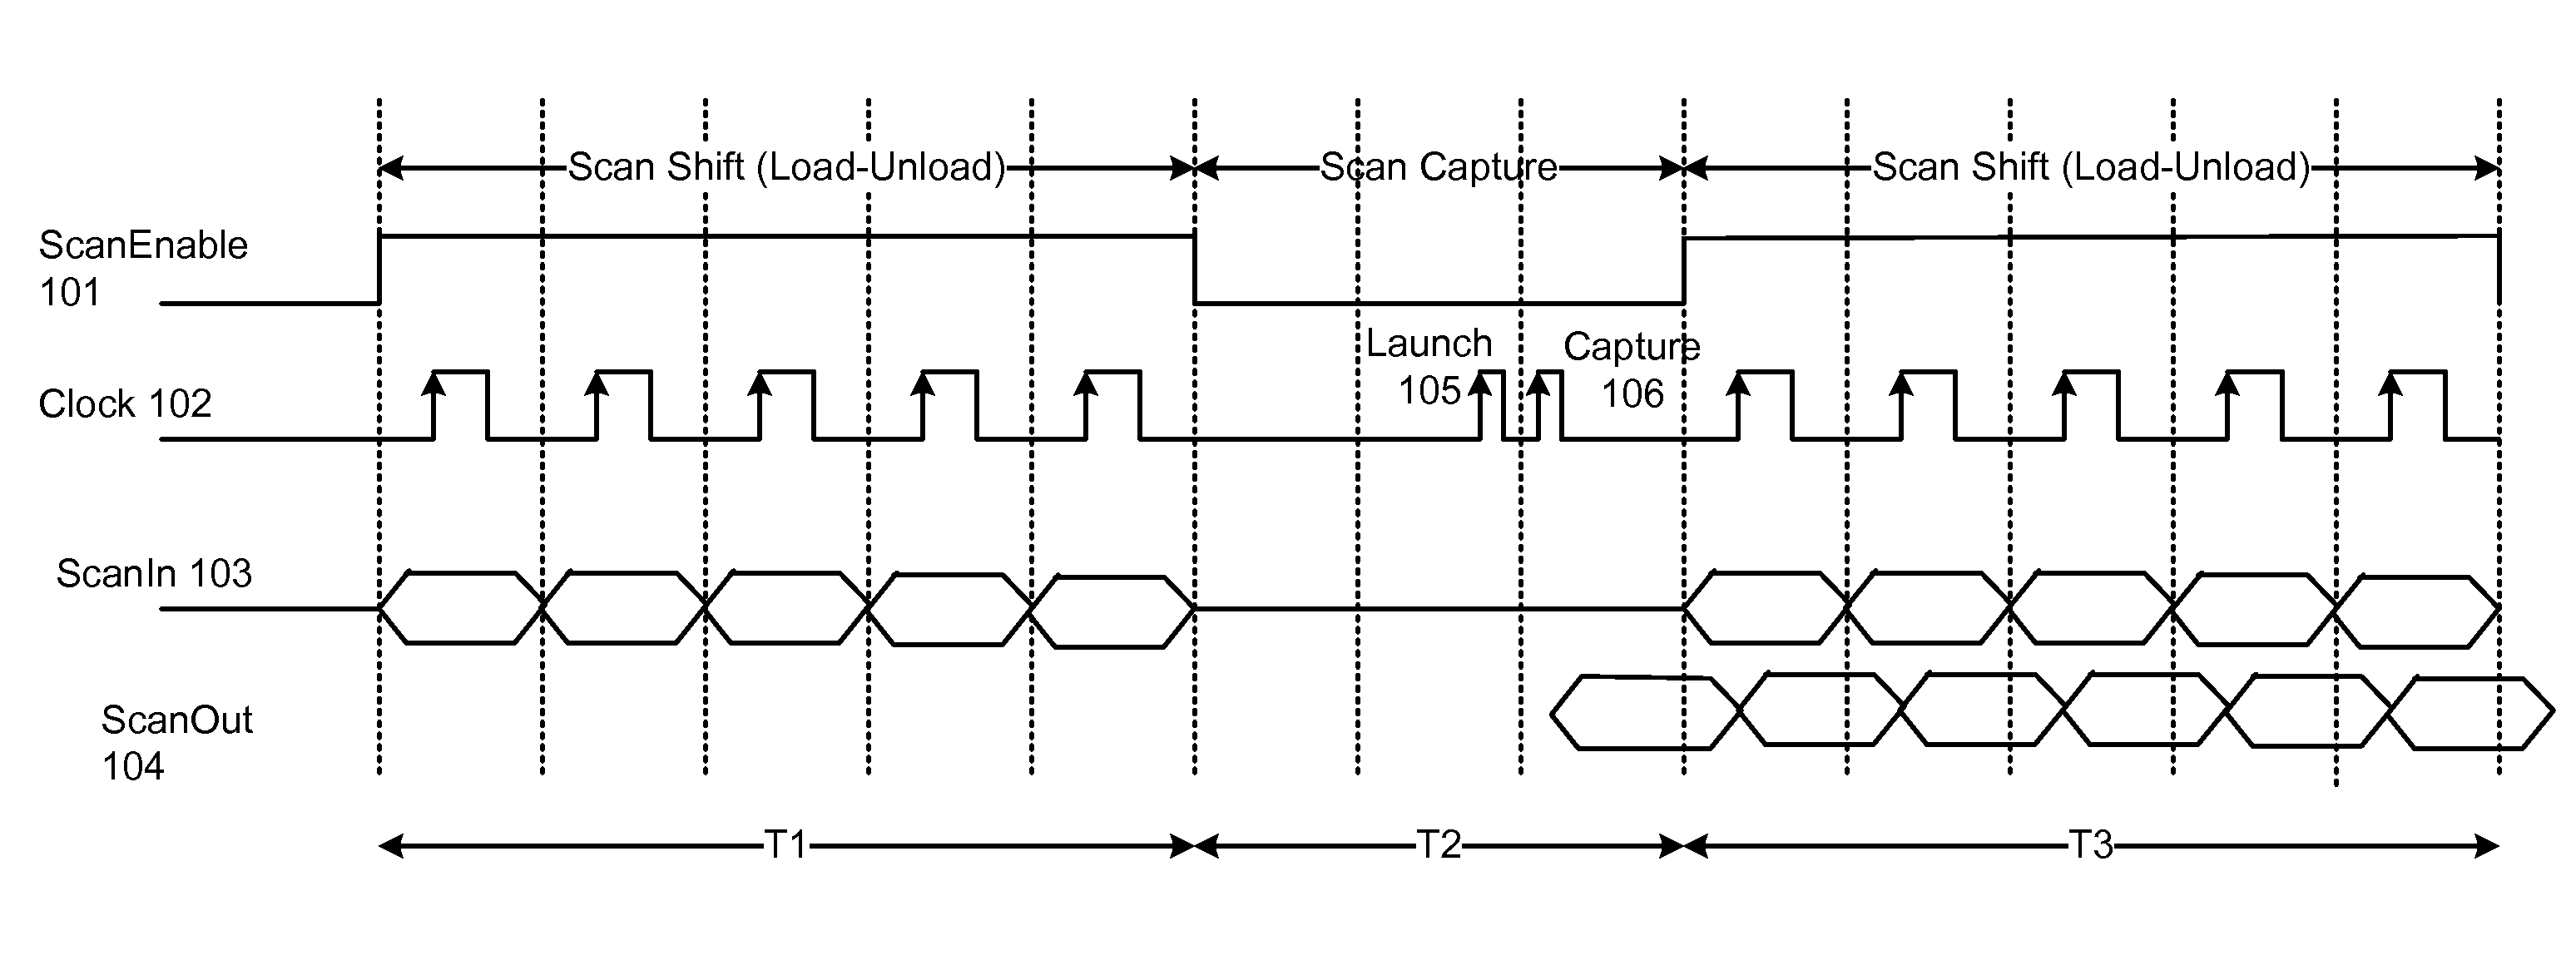 System for reducing peak power during scan shift at the global level for scan based tests